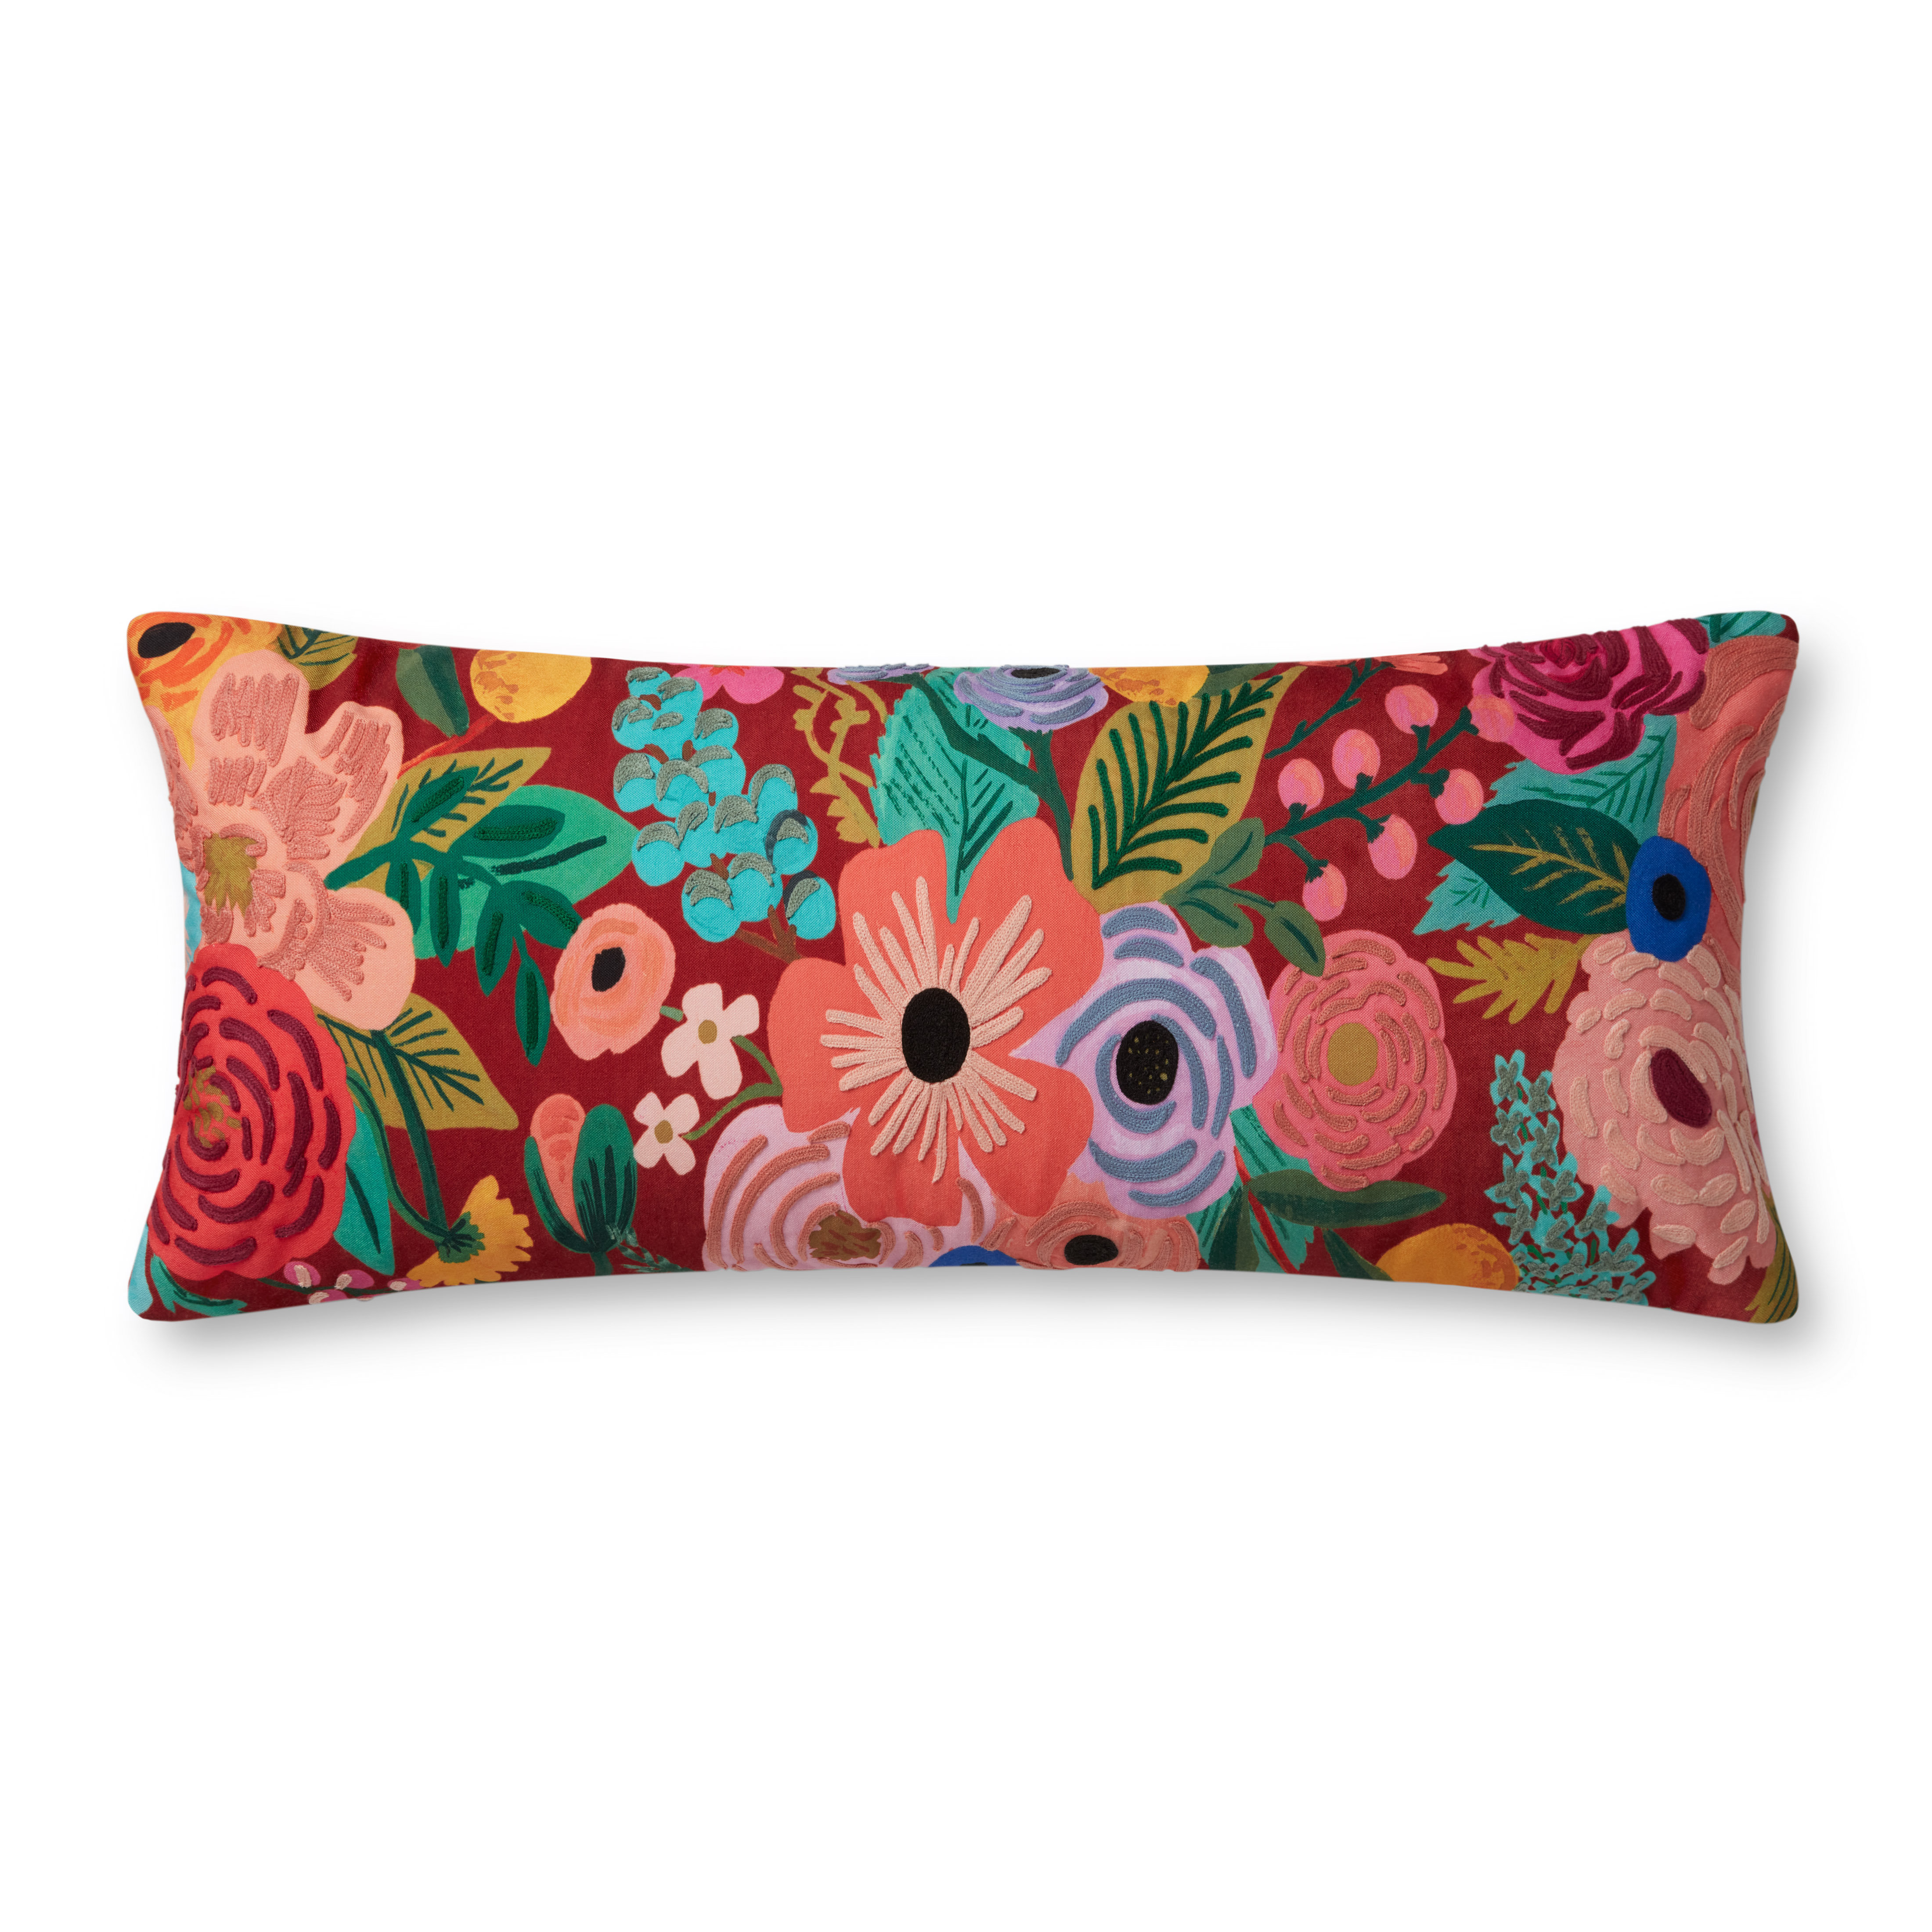 Vibrant hand embroidered cushion covers - Wildwood, Bude